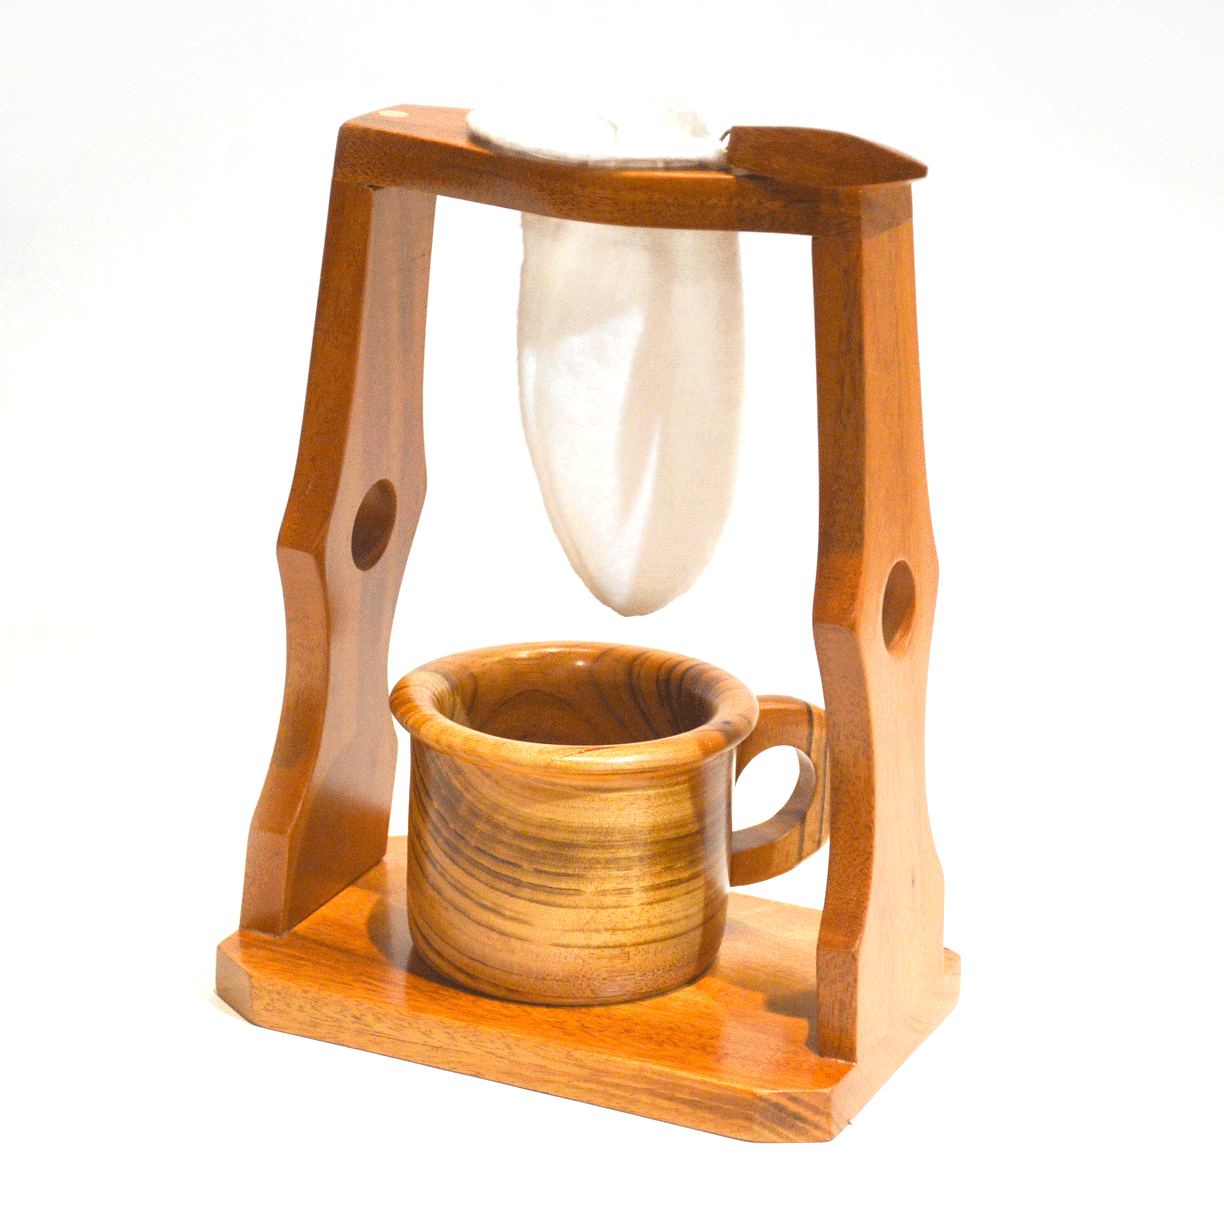 Wooden coffee brewer with mug and bag